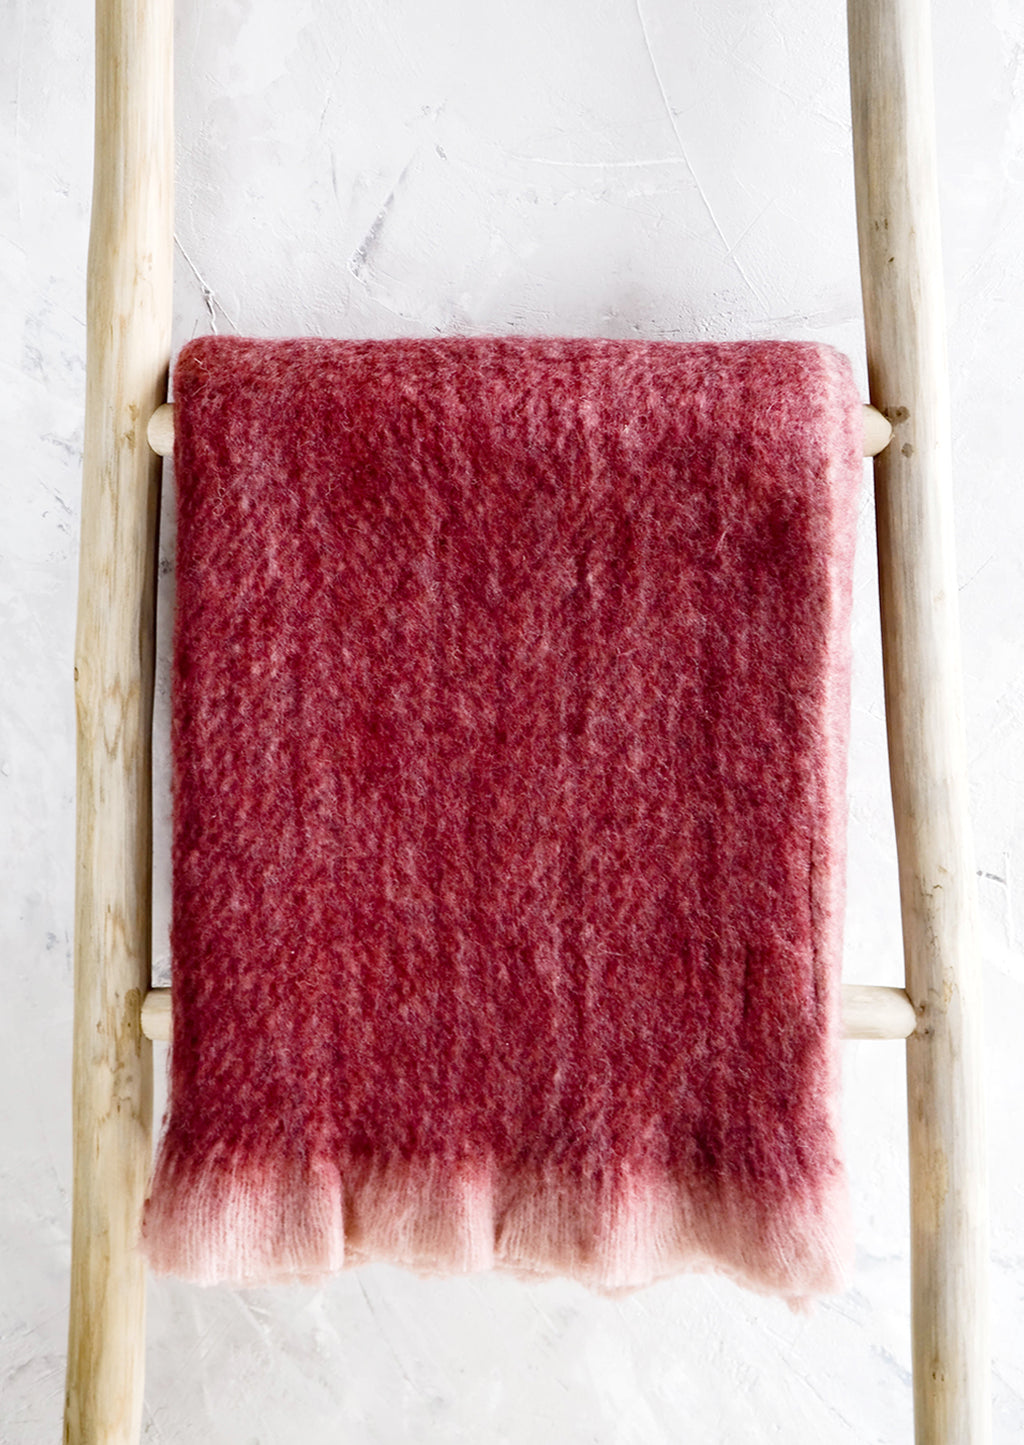 1: Plush, fuzzy blanket in wine red color with pale pink trim, displayed on ladder